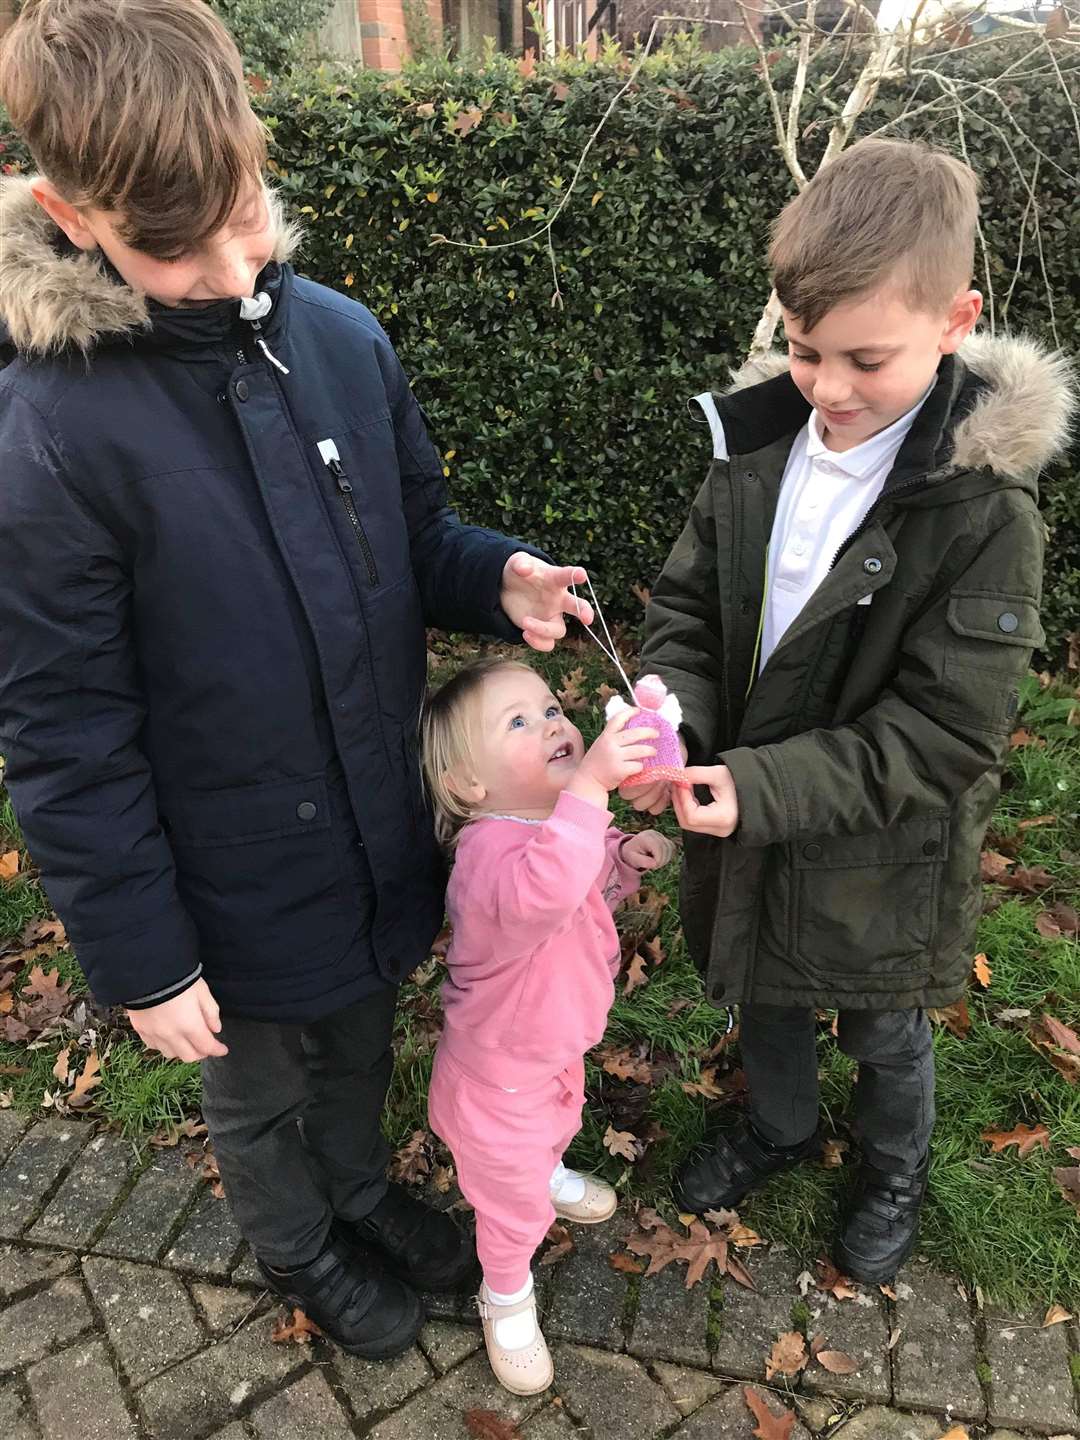 Cally's children discover their angel